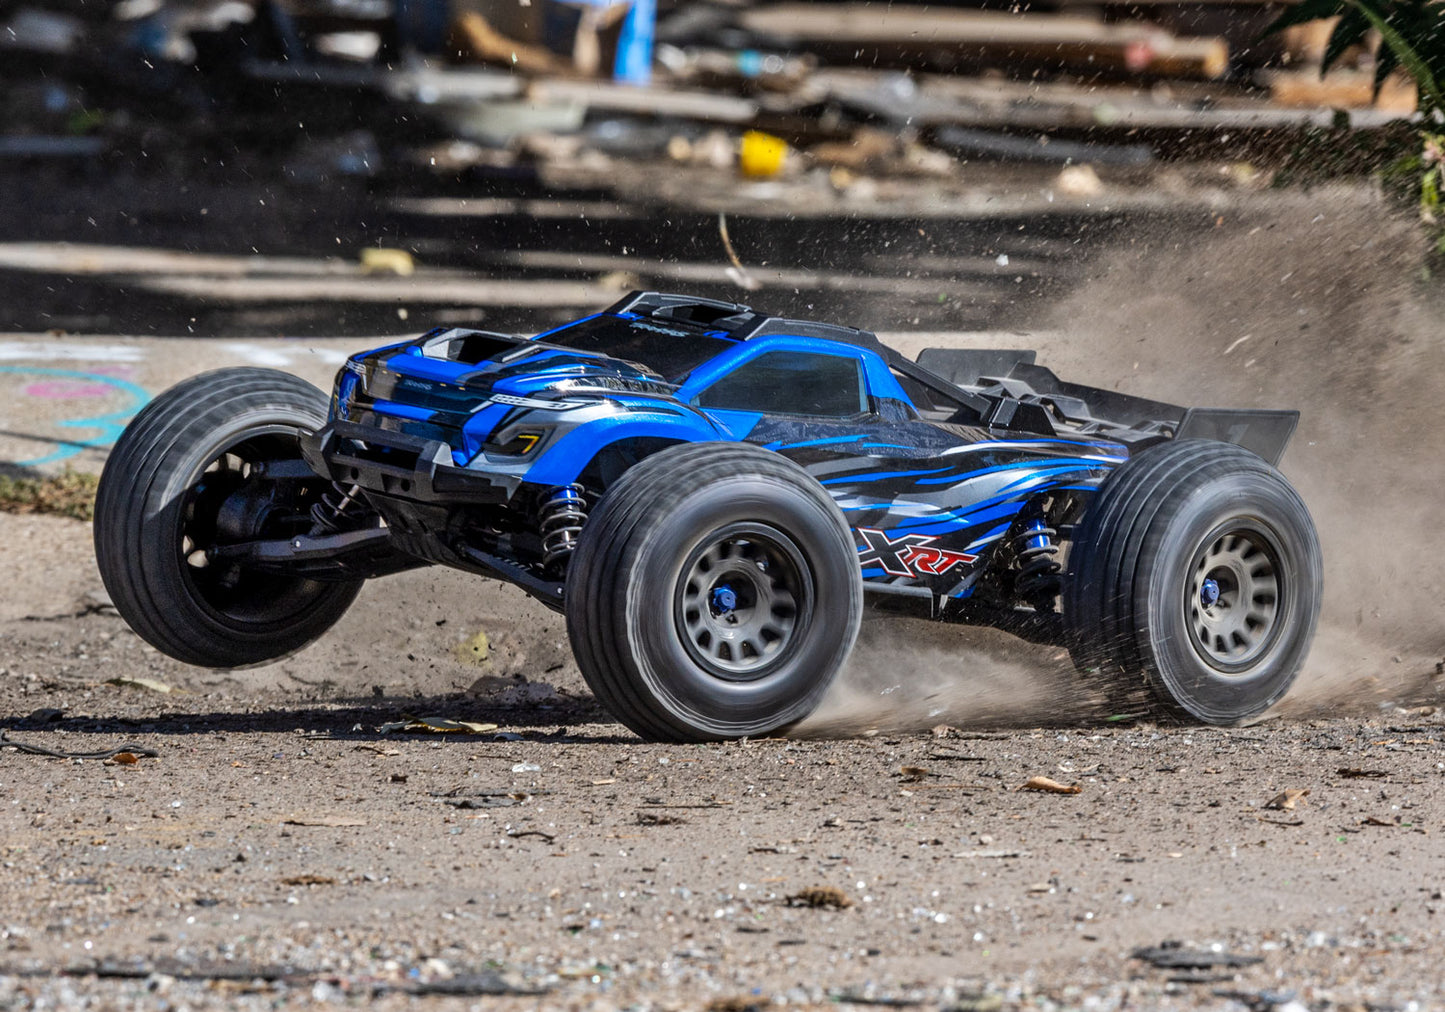 78086-4  XRT Brushless Electric Race Truck Blue